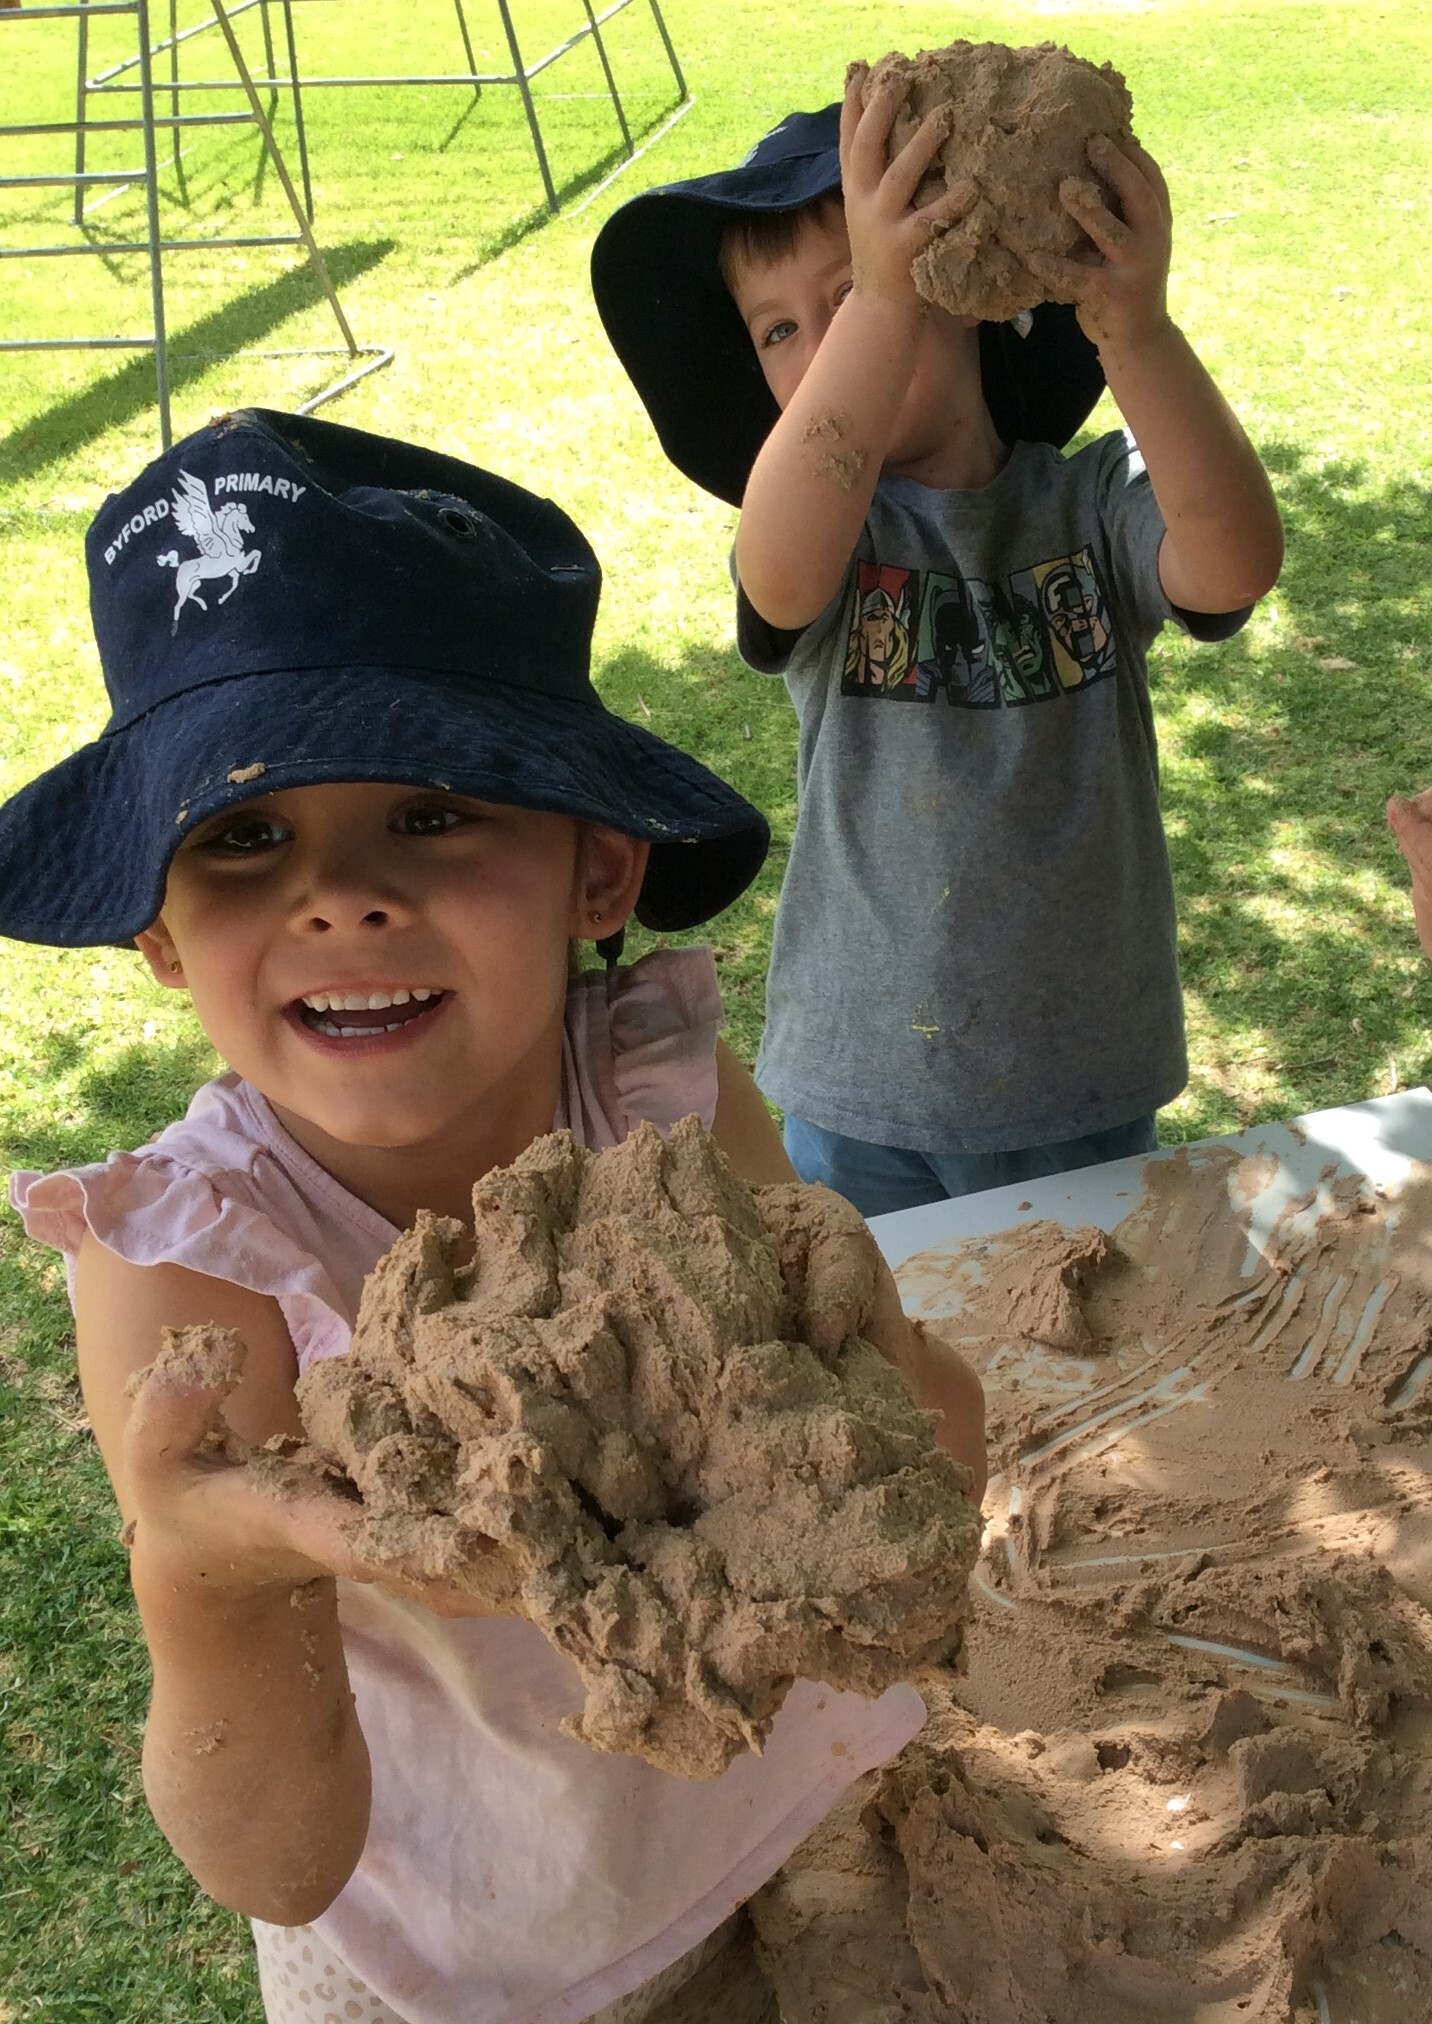 Messy Play Day - YELLOW (18)